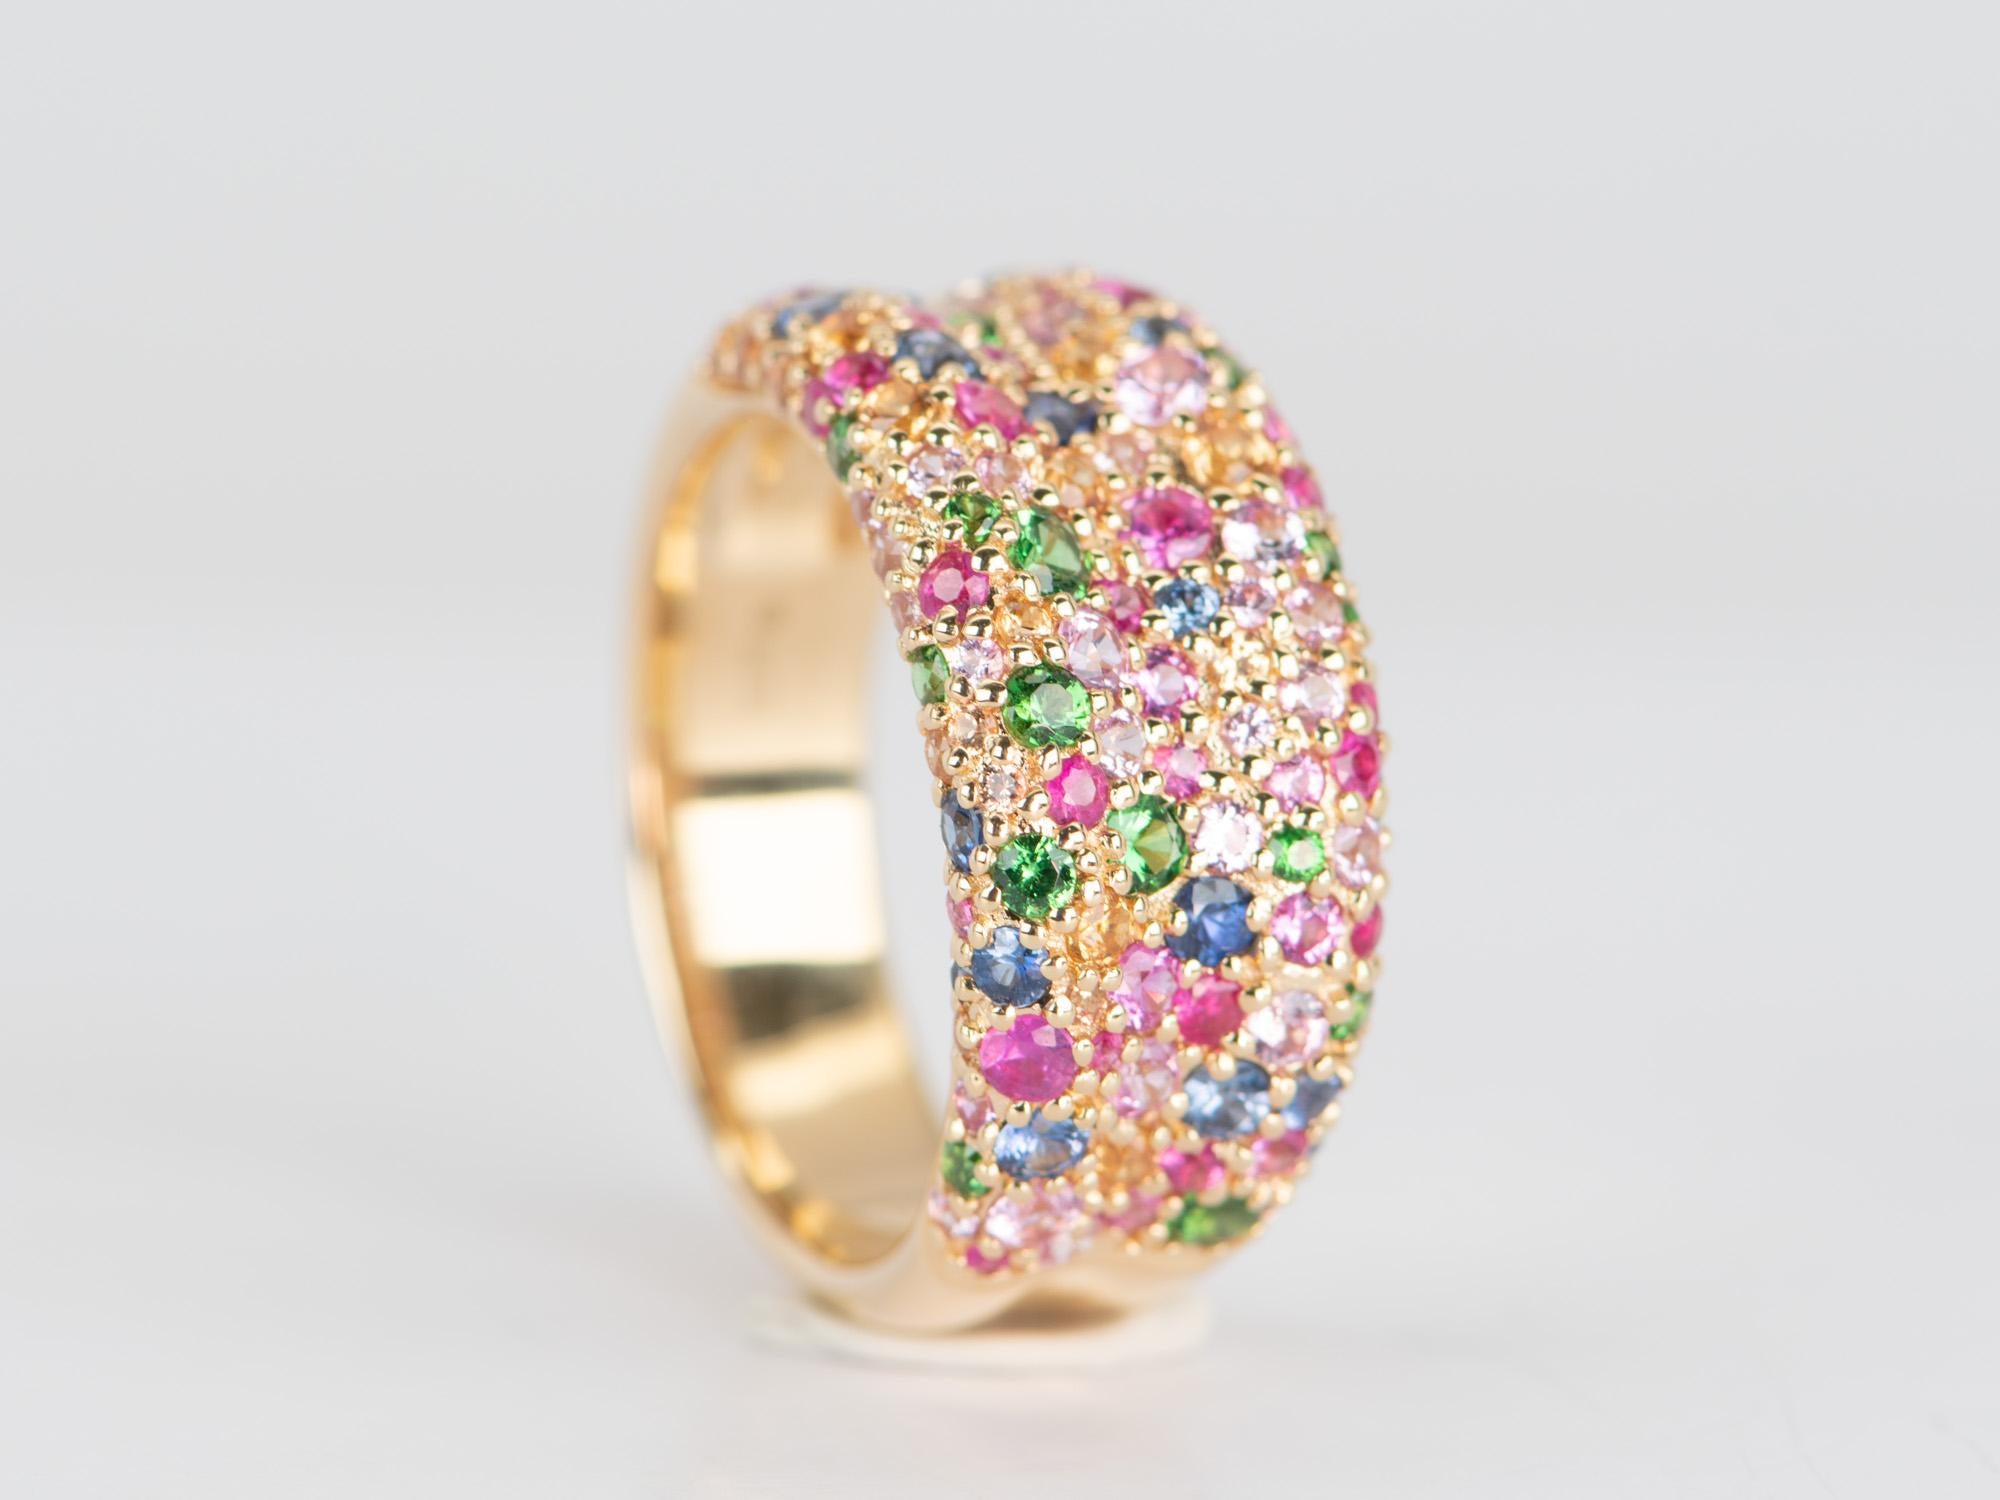 10mm Wide Mixed Bright Gemstone Pave Chunky Band 18K Gold ~8g R5074 In New Condition For Sale In Osprey, FL